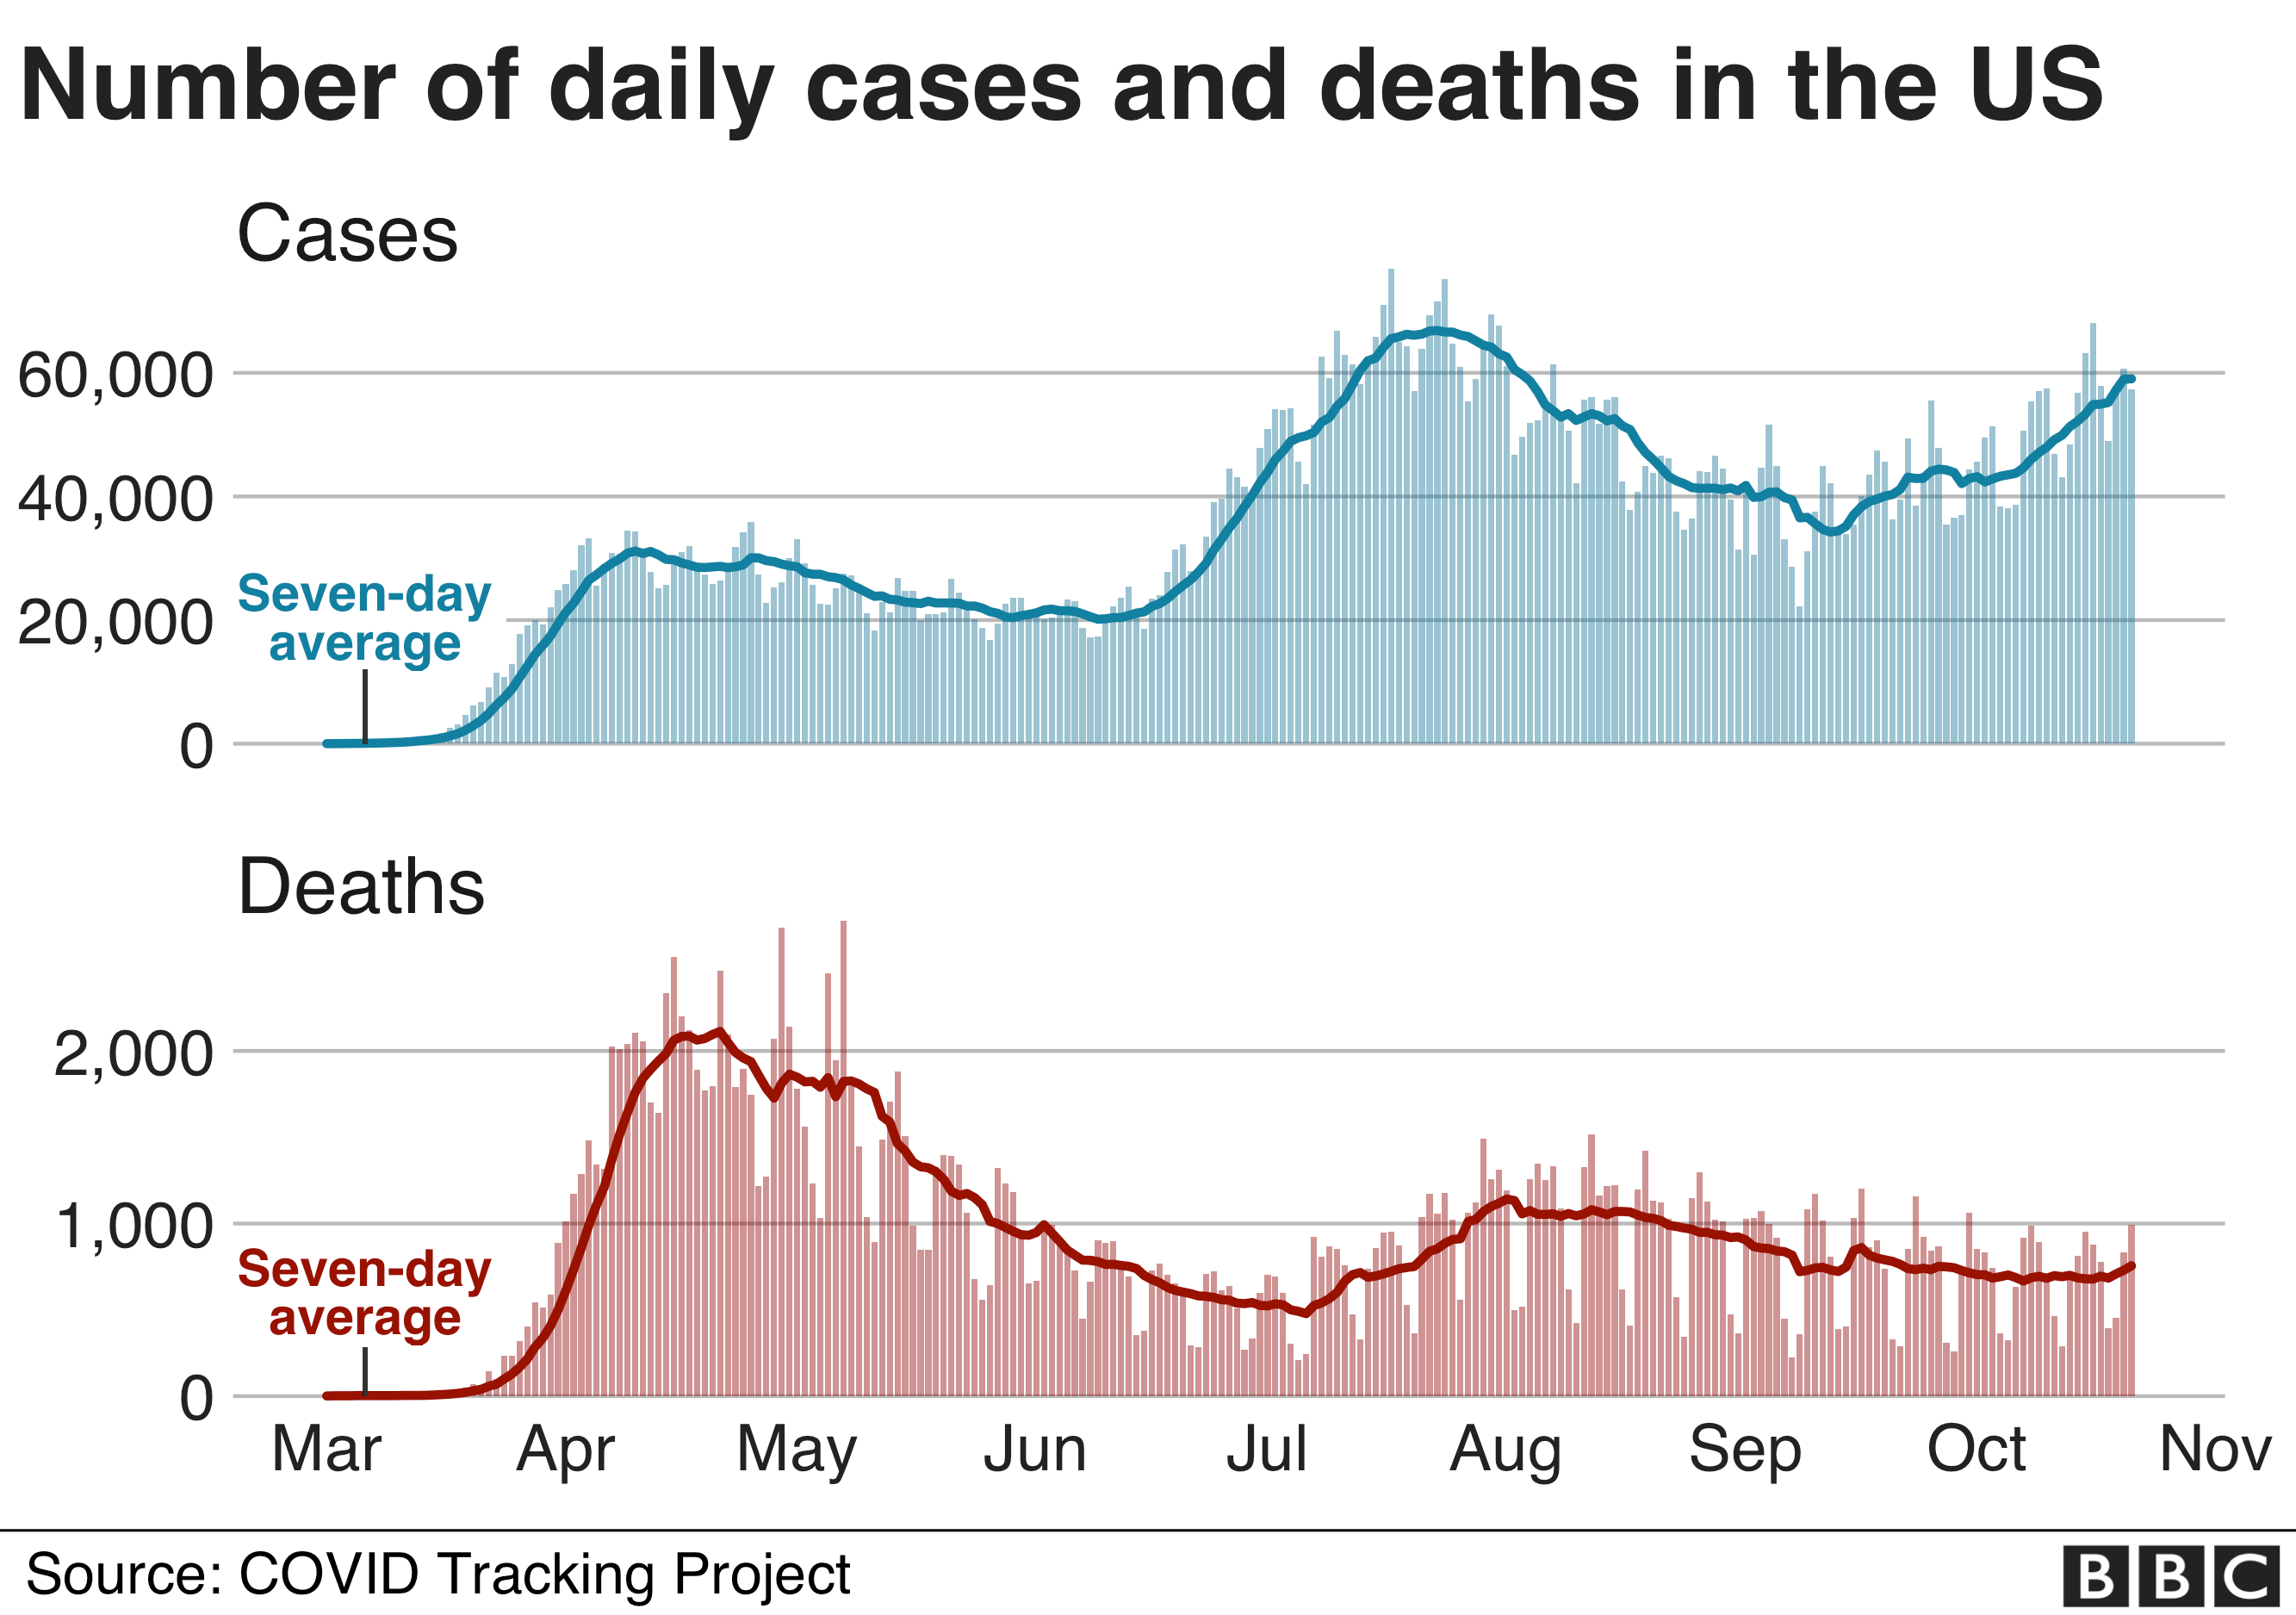 A graph showing the number of daily coronavirus cases and deaths in the US